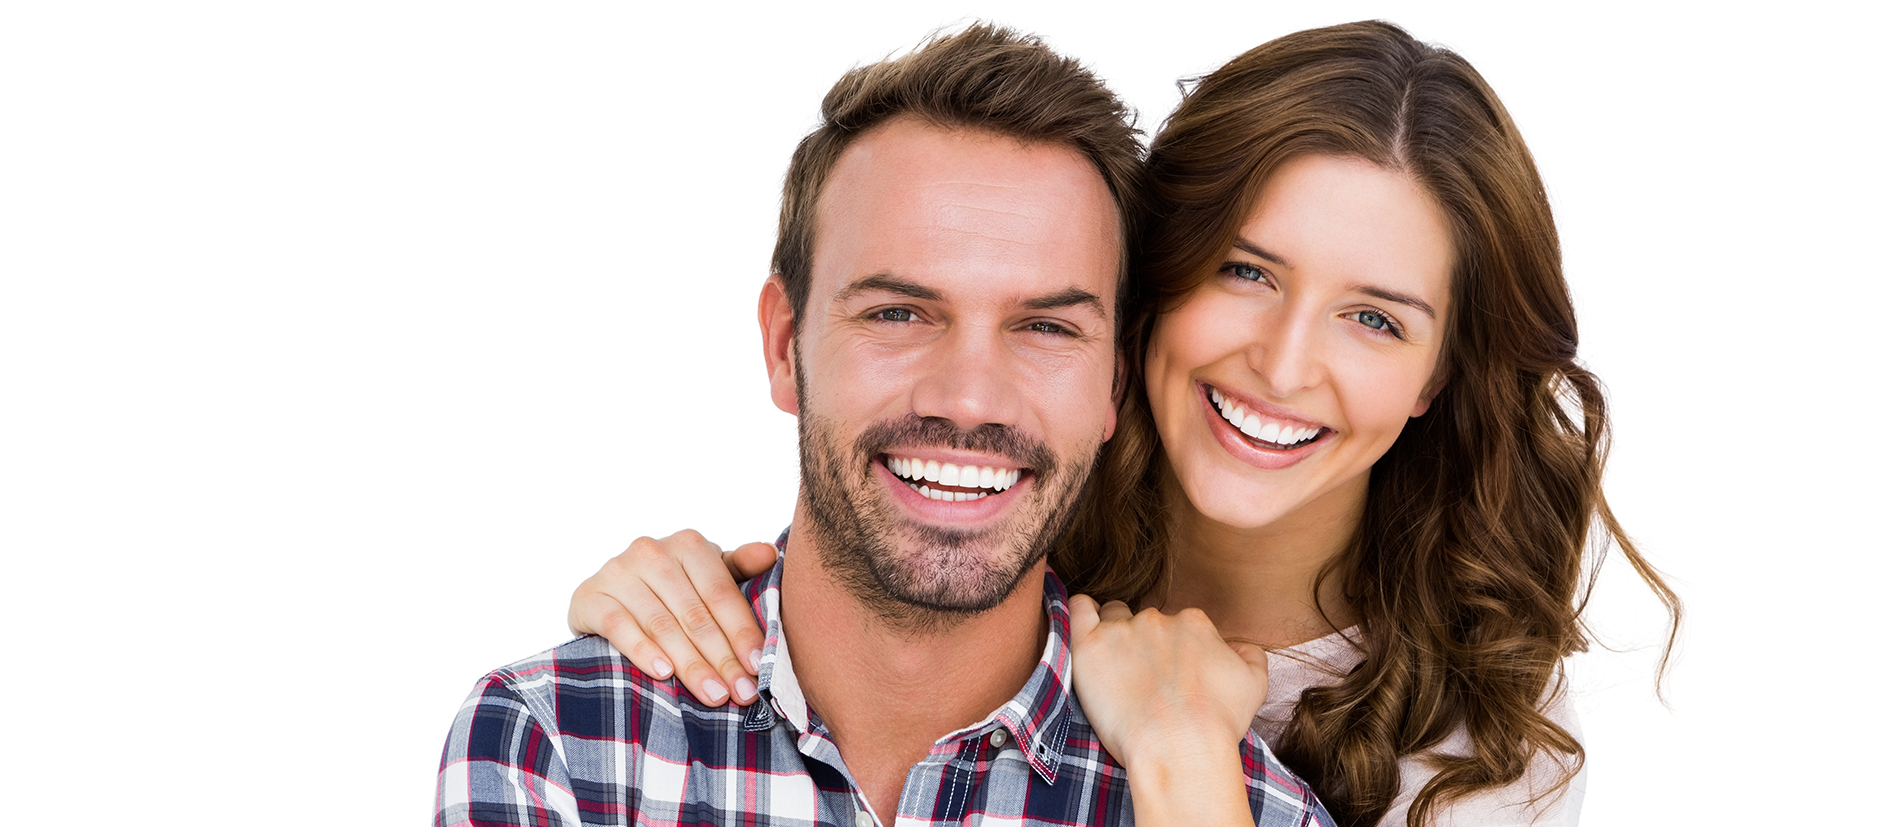 Dental Services in Syosset